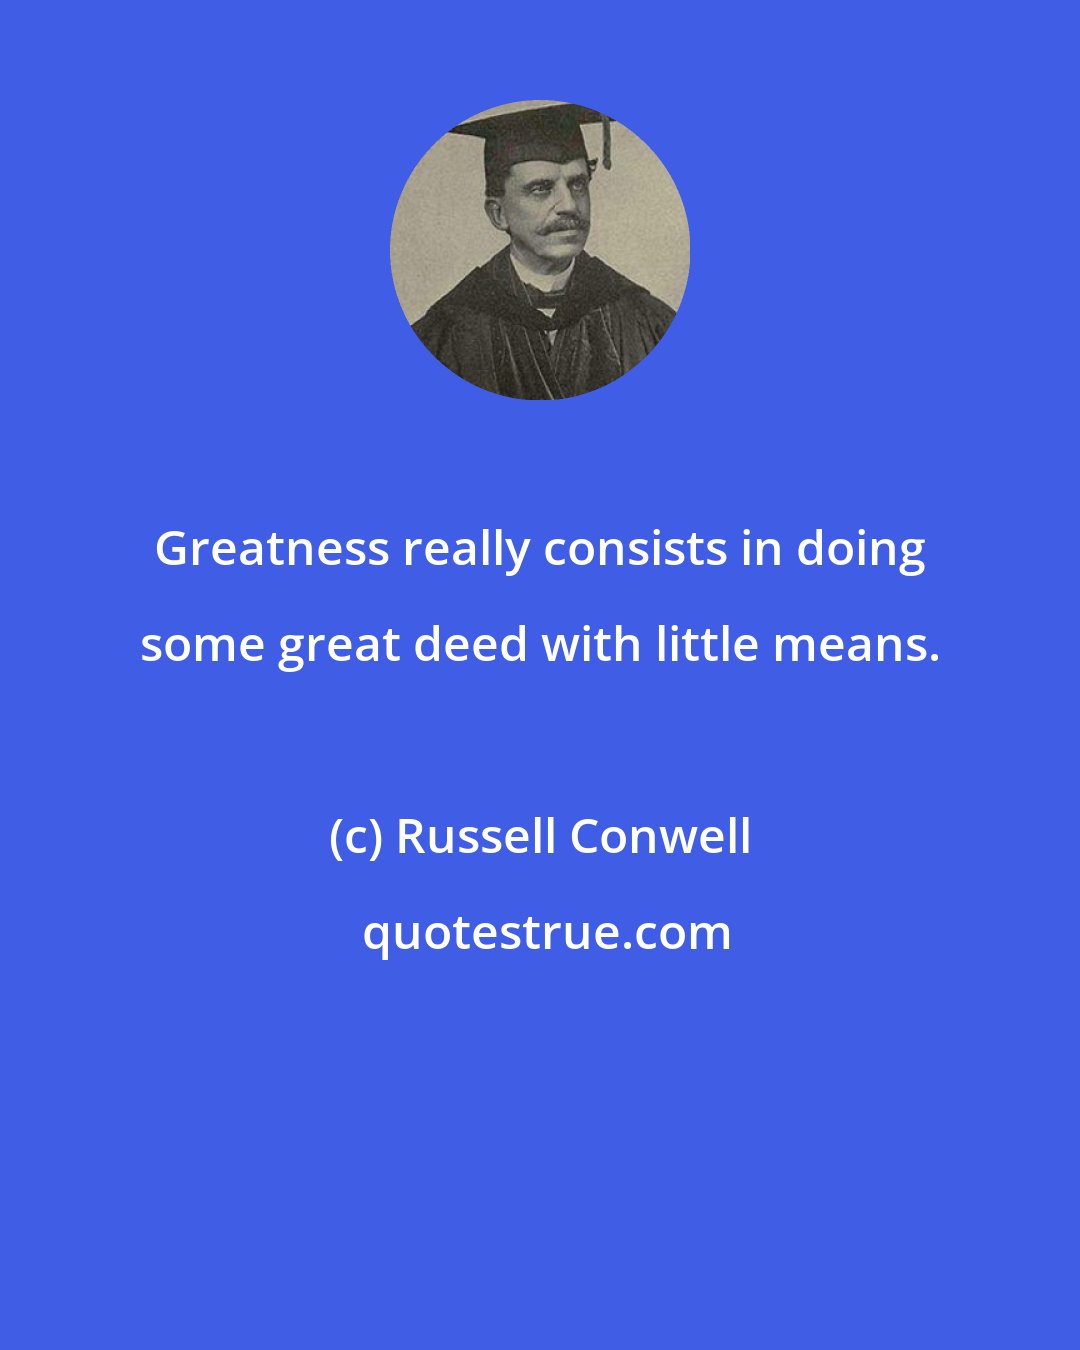 Russell Conwell: Greatness really consists in doing some great deed with little means.